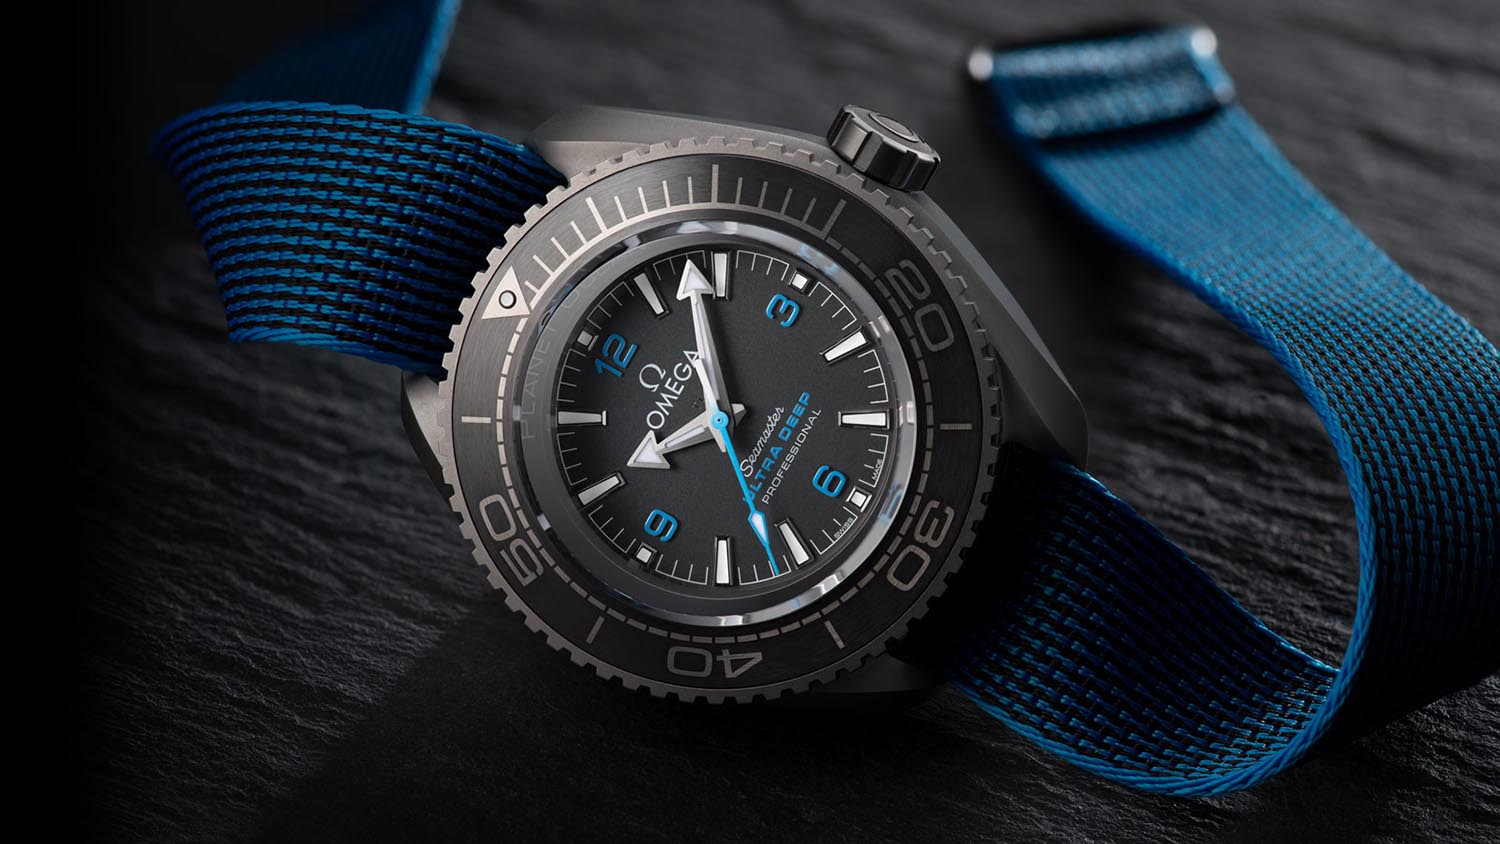 Omega Seamaster Ultra Deep Sea Watch – Fit For Exploration